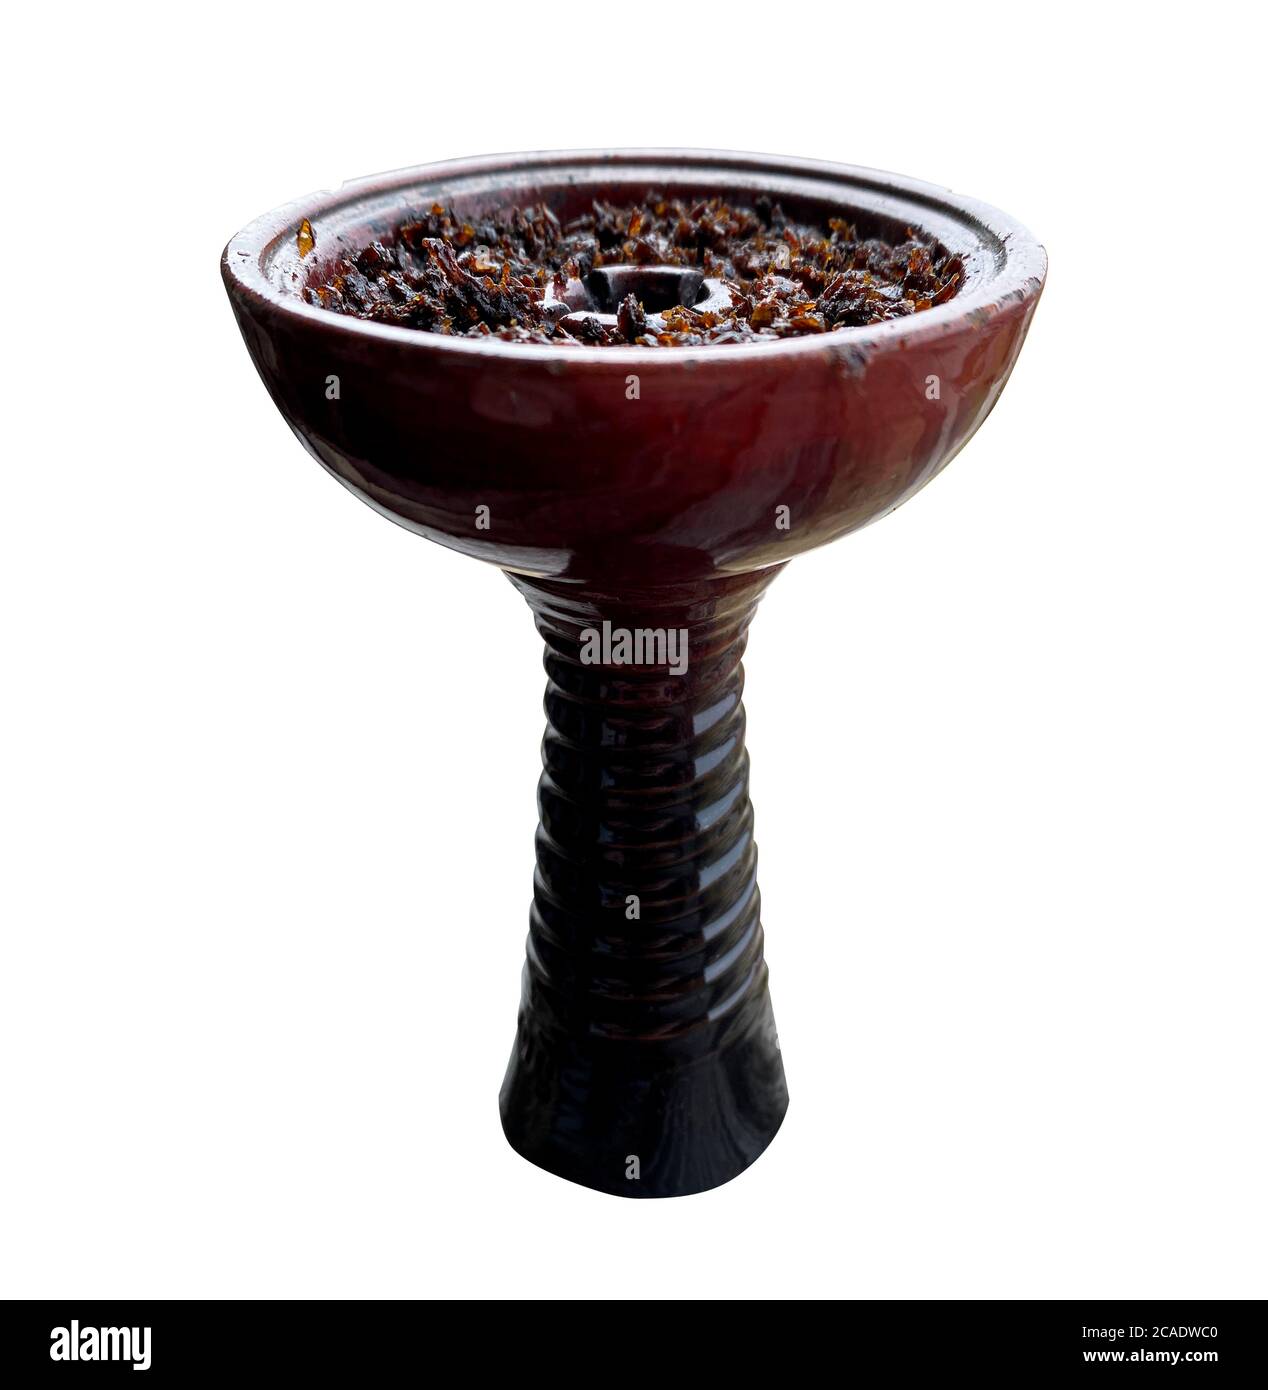 https://c8.alamy.com/comp/2CADWC0/clay-bowl-with-tobacco-for-smoking-hookah-side-view-on-a-white-isolated-background-2CADWC0.jpg